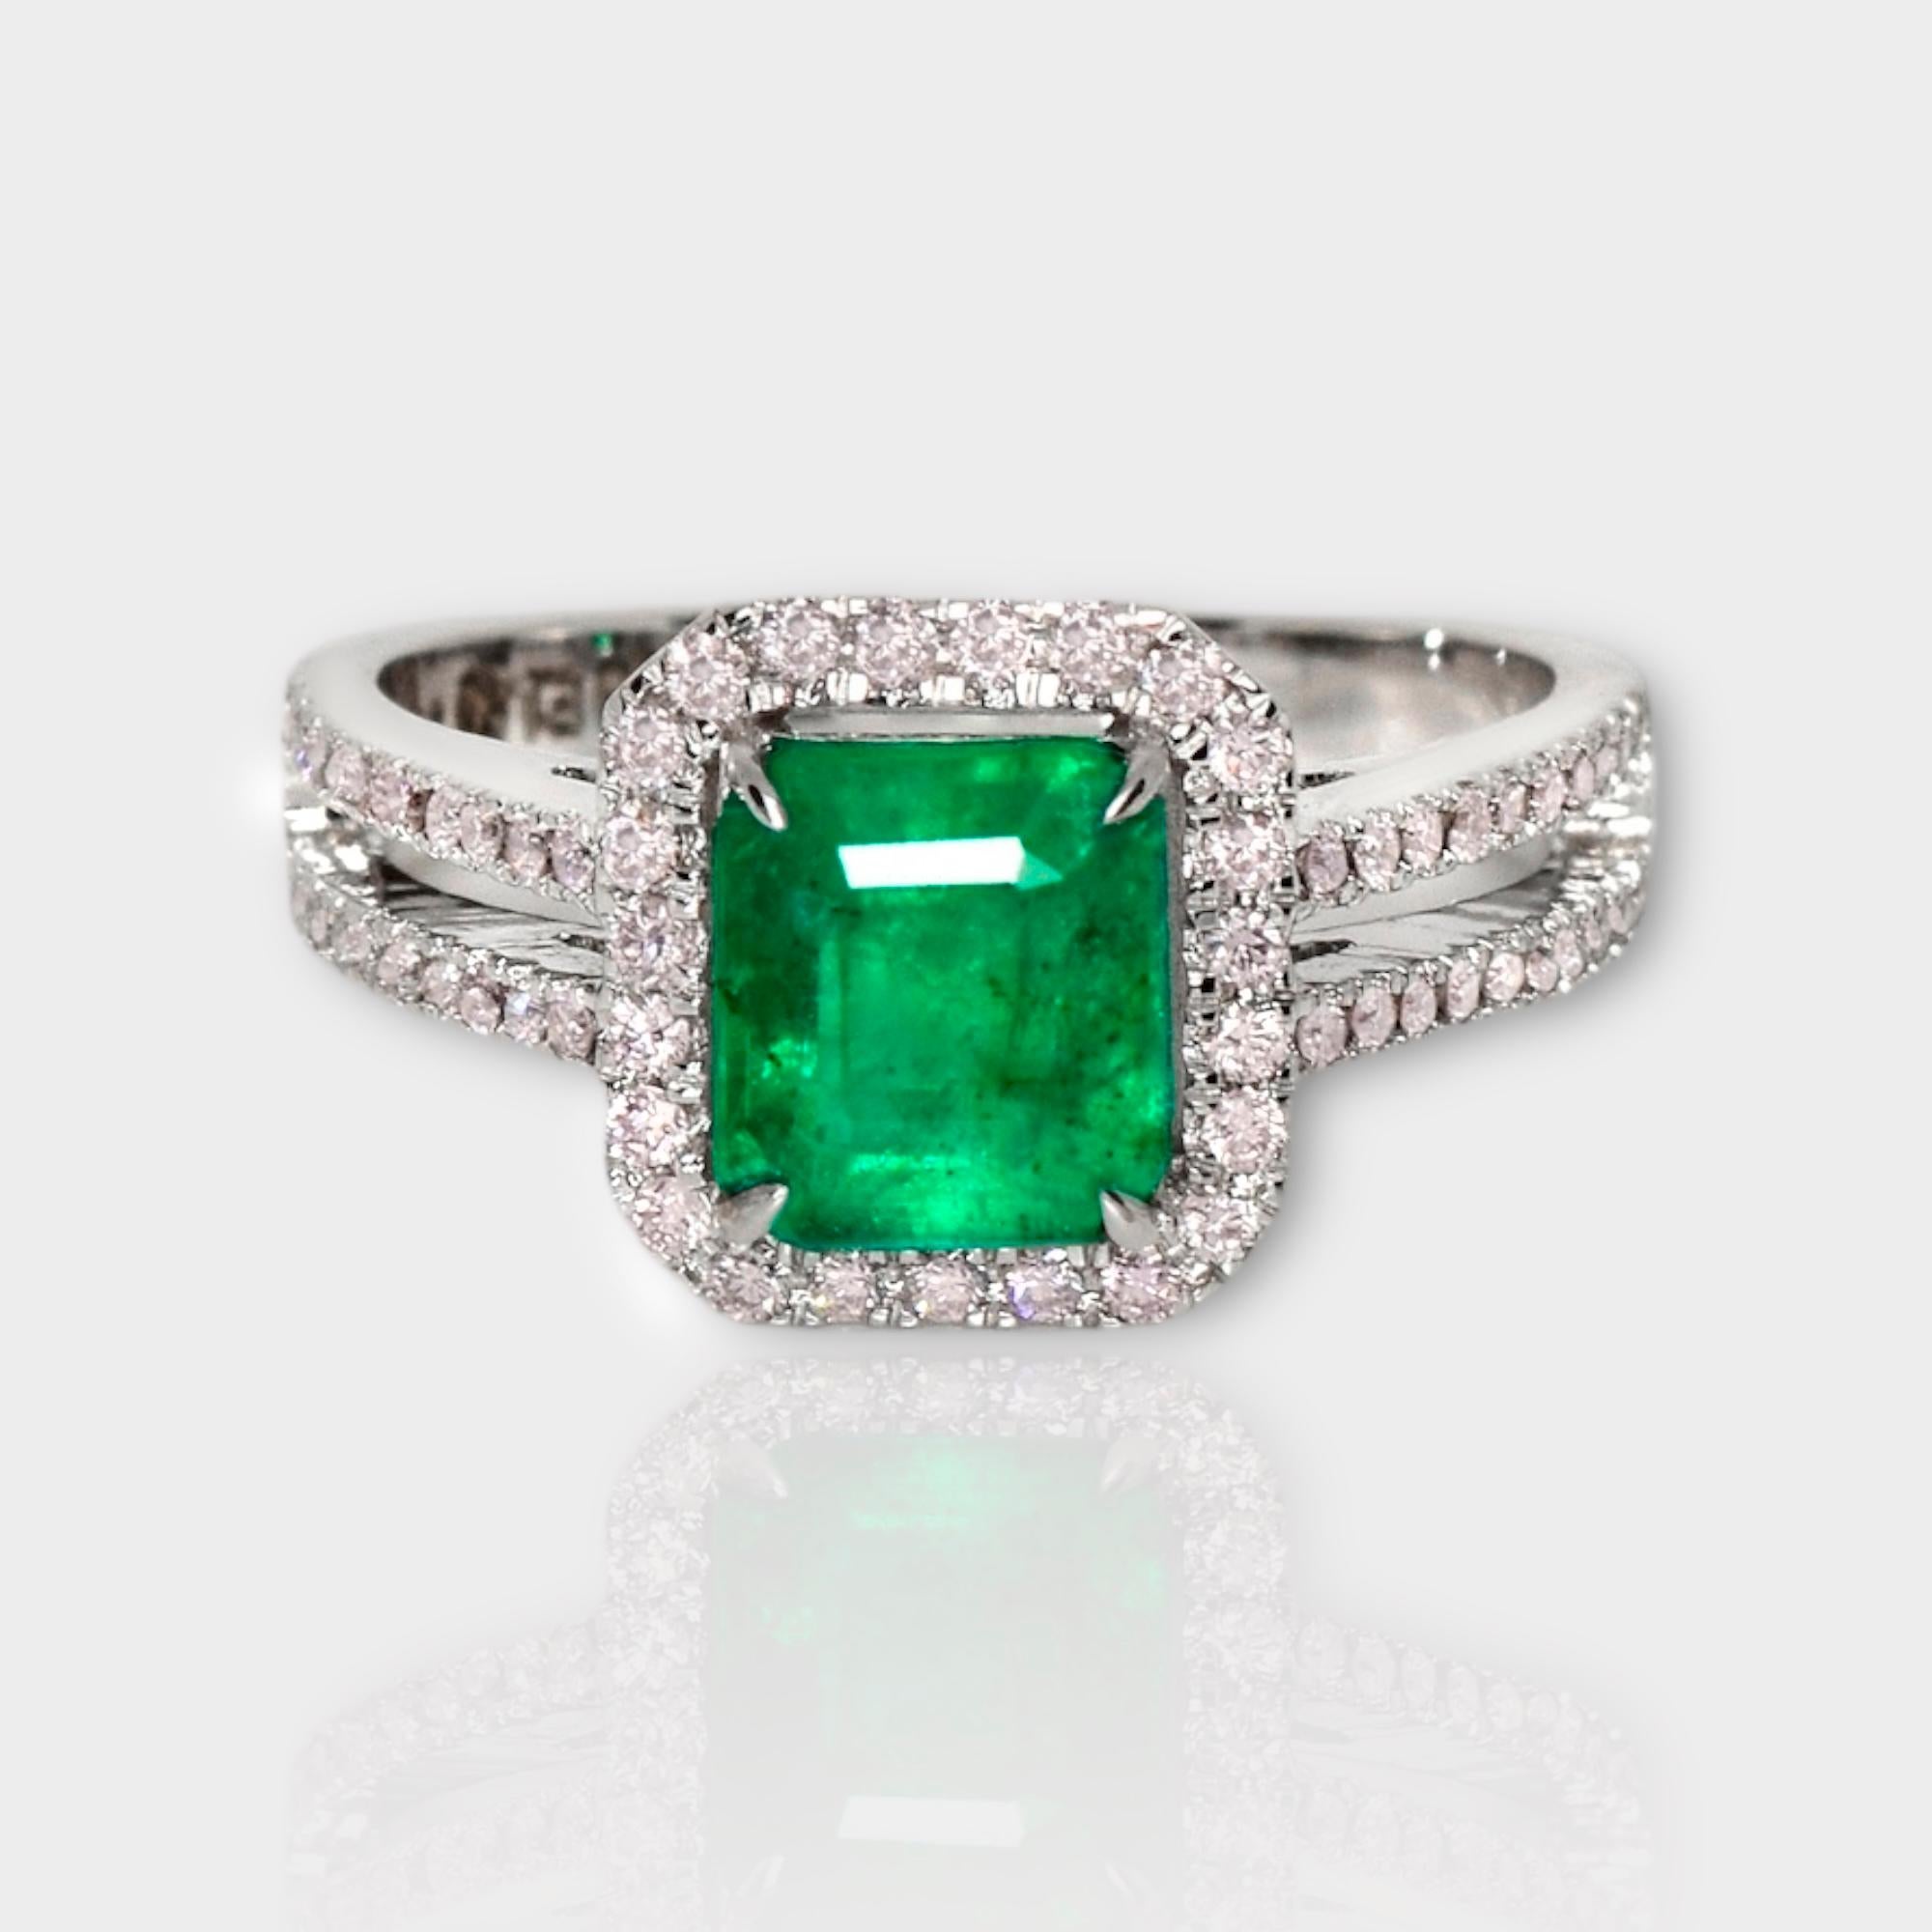 *IGI 18K 1.50 ct Natural Green Emerald&Pink Diamond Art Deco Engagement Ring*
IGI-certified natural Zambia green emerald weighing 1.50 ct set on the 18K white gold arc deco design band with natural pink diamonds weighing 0.40 ct. 

The good-quality